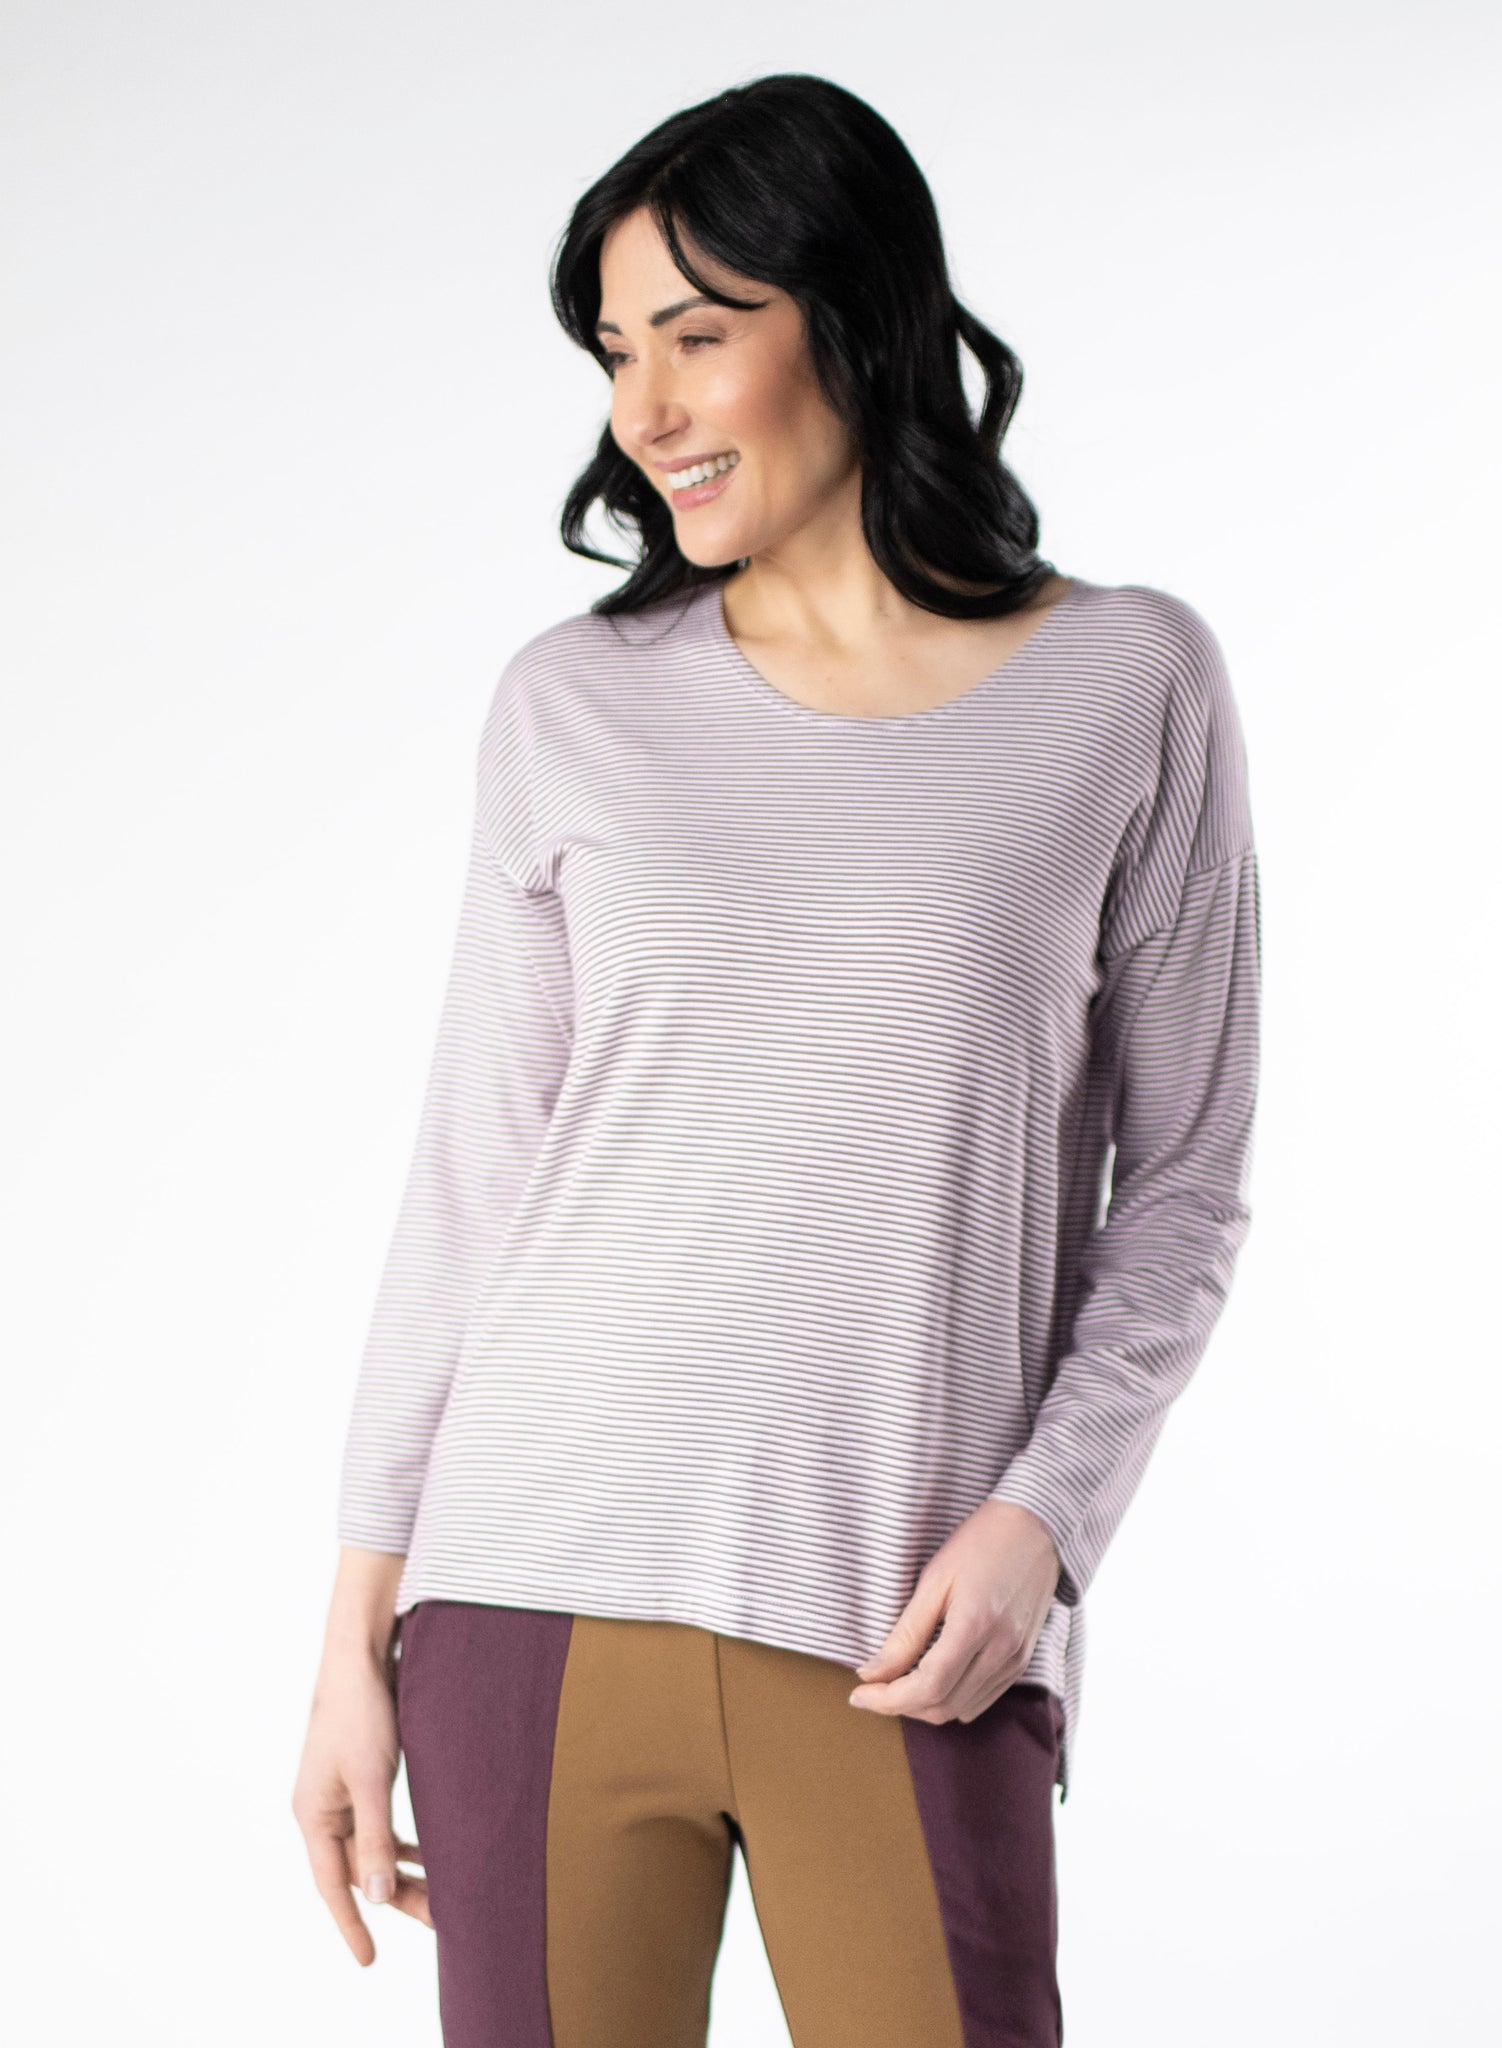 Burgundy and white striped long sleeve top with scoop neck and relaxed fit to the body. Step hem with a small side slit. 